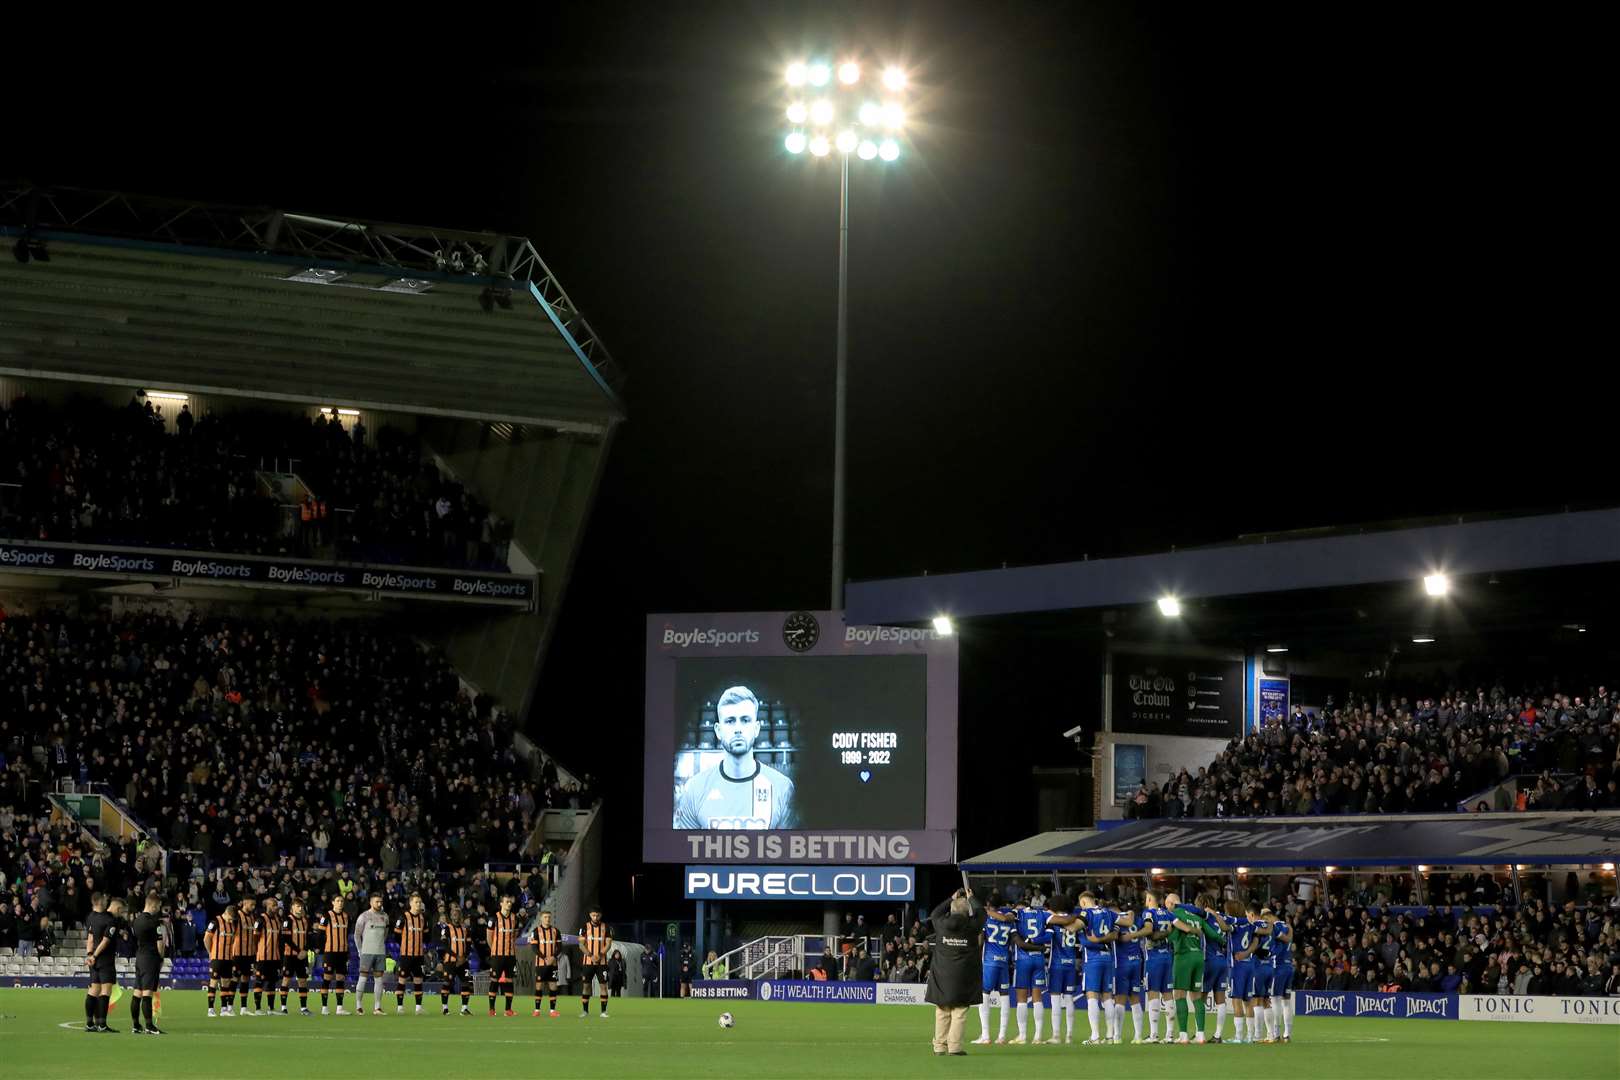 A minute’s silence was held for Cody Fisher at Birmingham City football club’s ground days after his death (Bradley Collyer/PA)